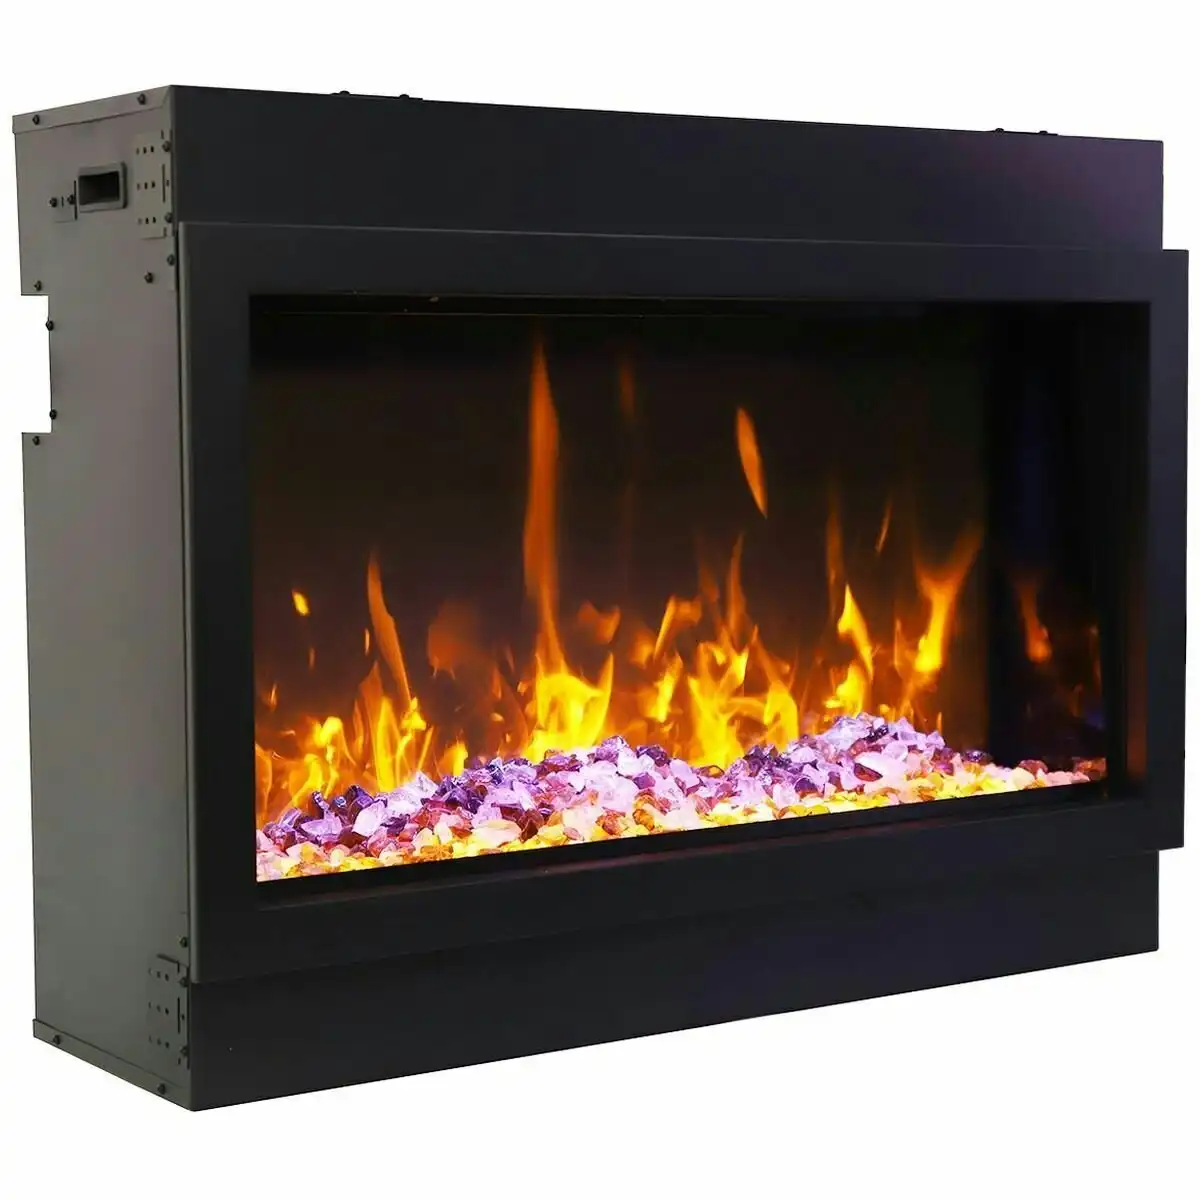 Remii 45 Inch Extra Tall Indoor Built-in Electric Fireplace with Black Steel Surround